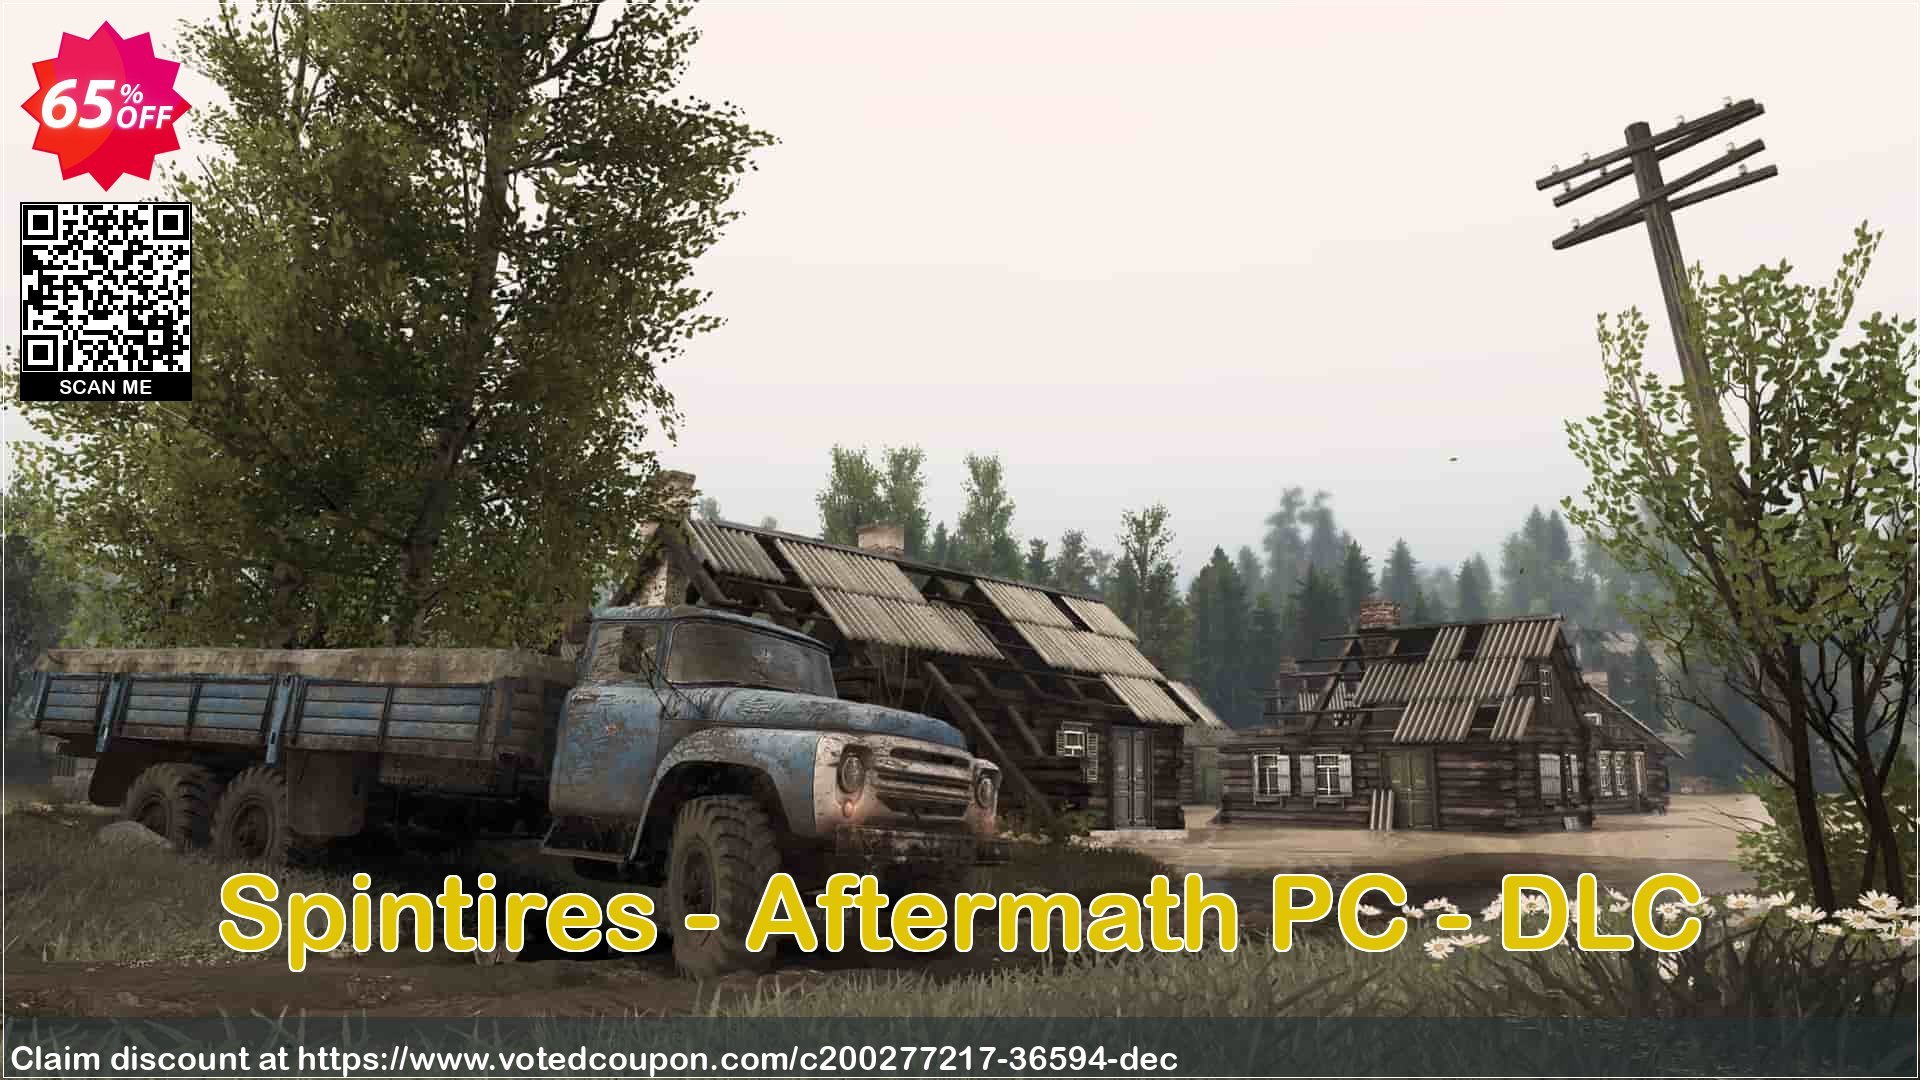 Spintires - Aftermath PC - DLC Coupon Code May 2024, 65% OFF - VotedCoupon